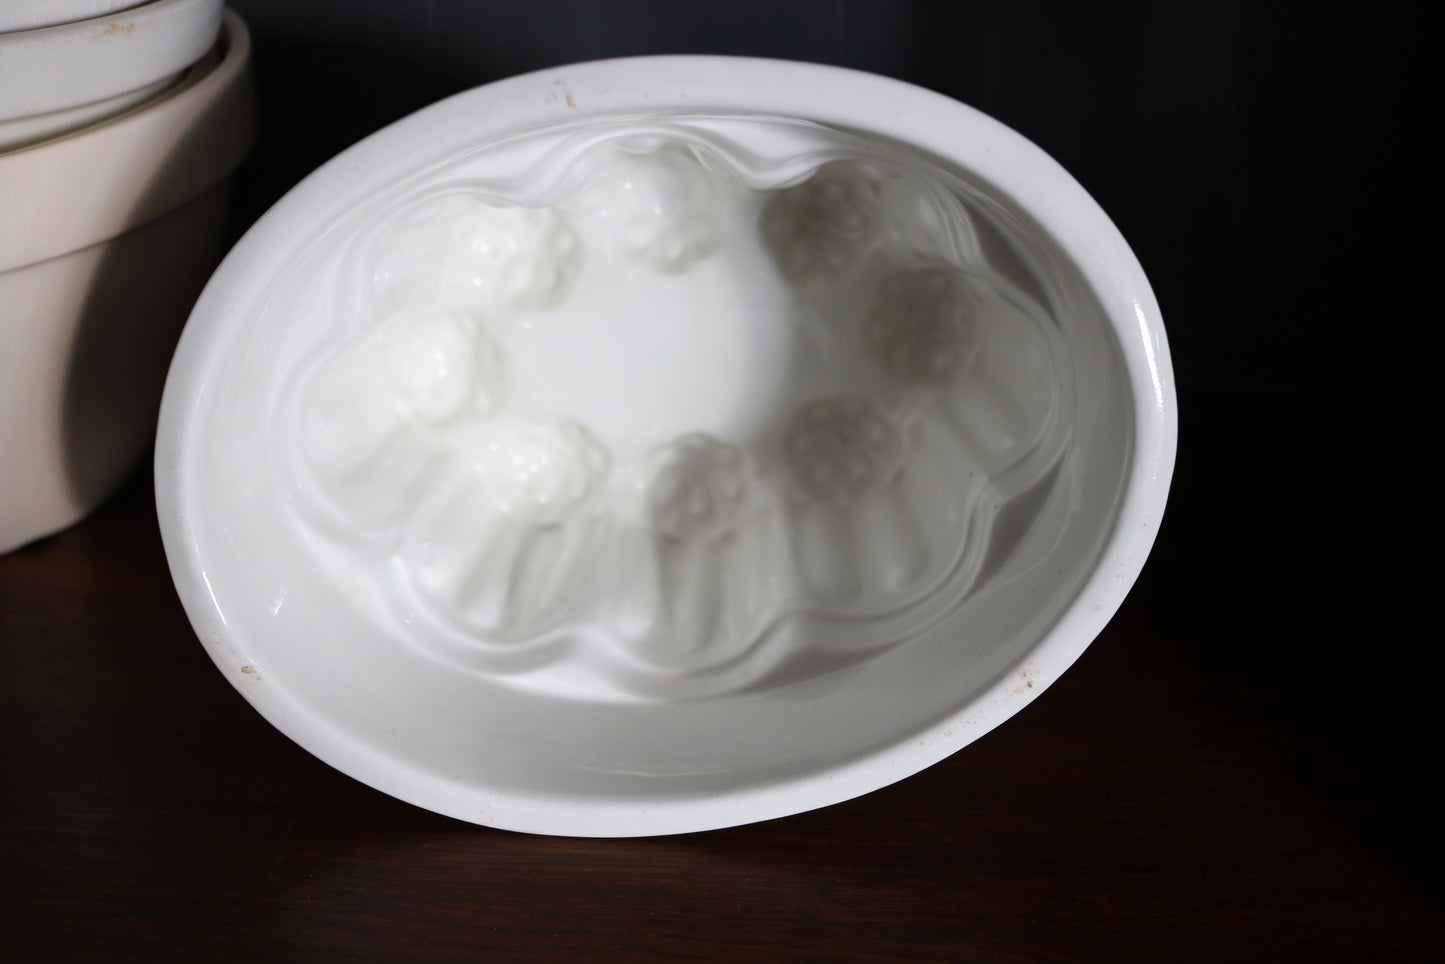 antique ironstone jelly mould or blancmange